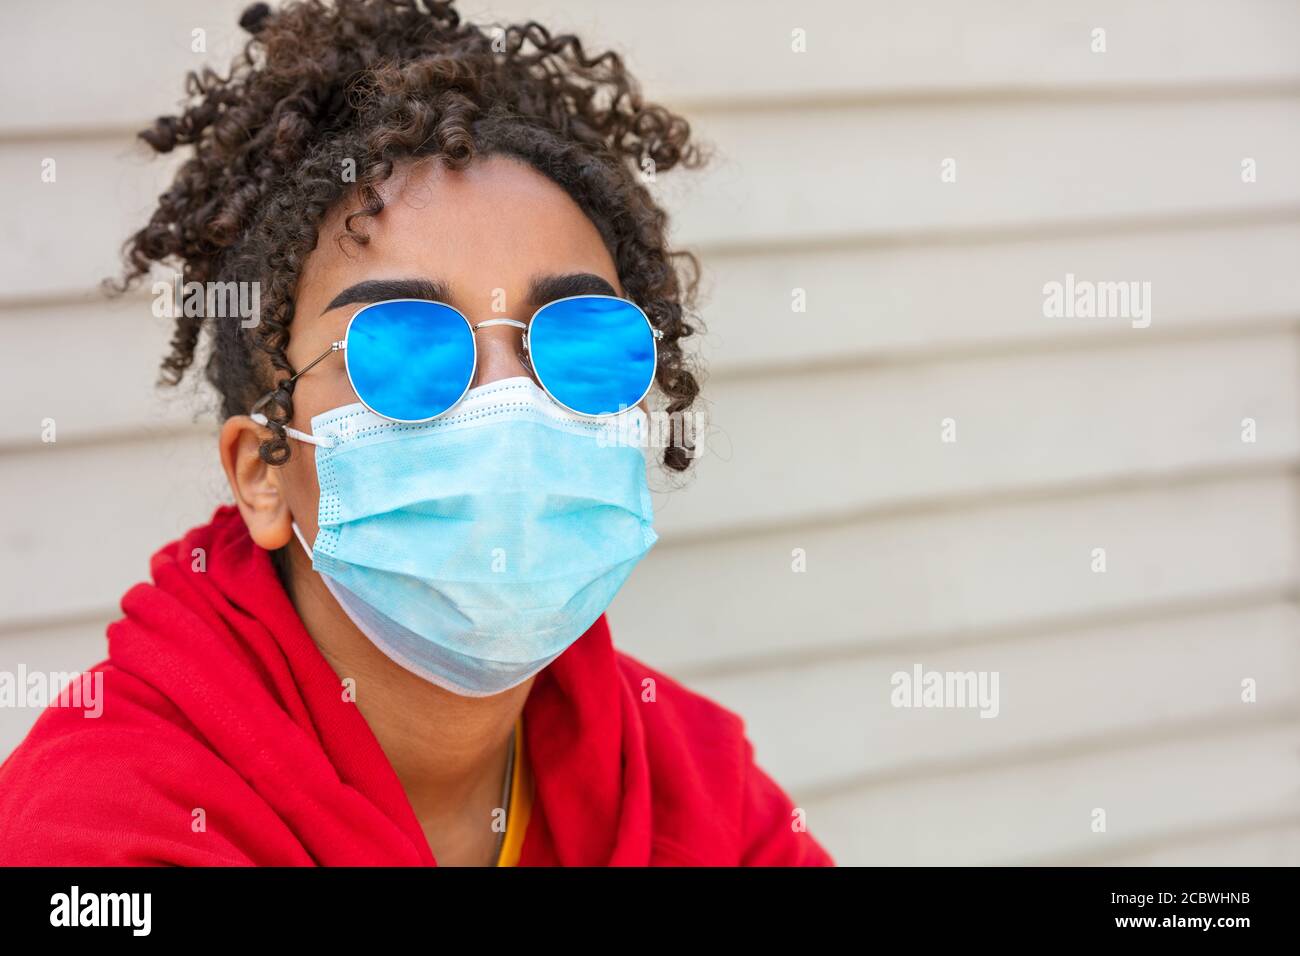 Girl teenager teen mixed race biracial African American female young woman wearing blue sunglasses and face mask in Coronavirus COVID-19 pandemic Stock Photo